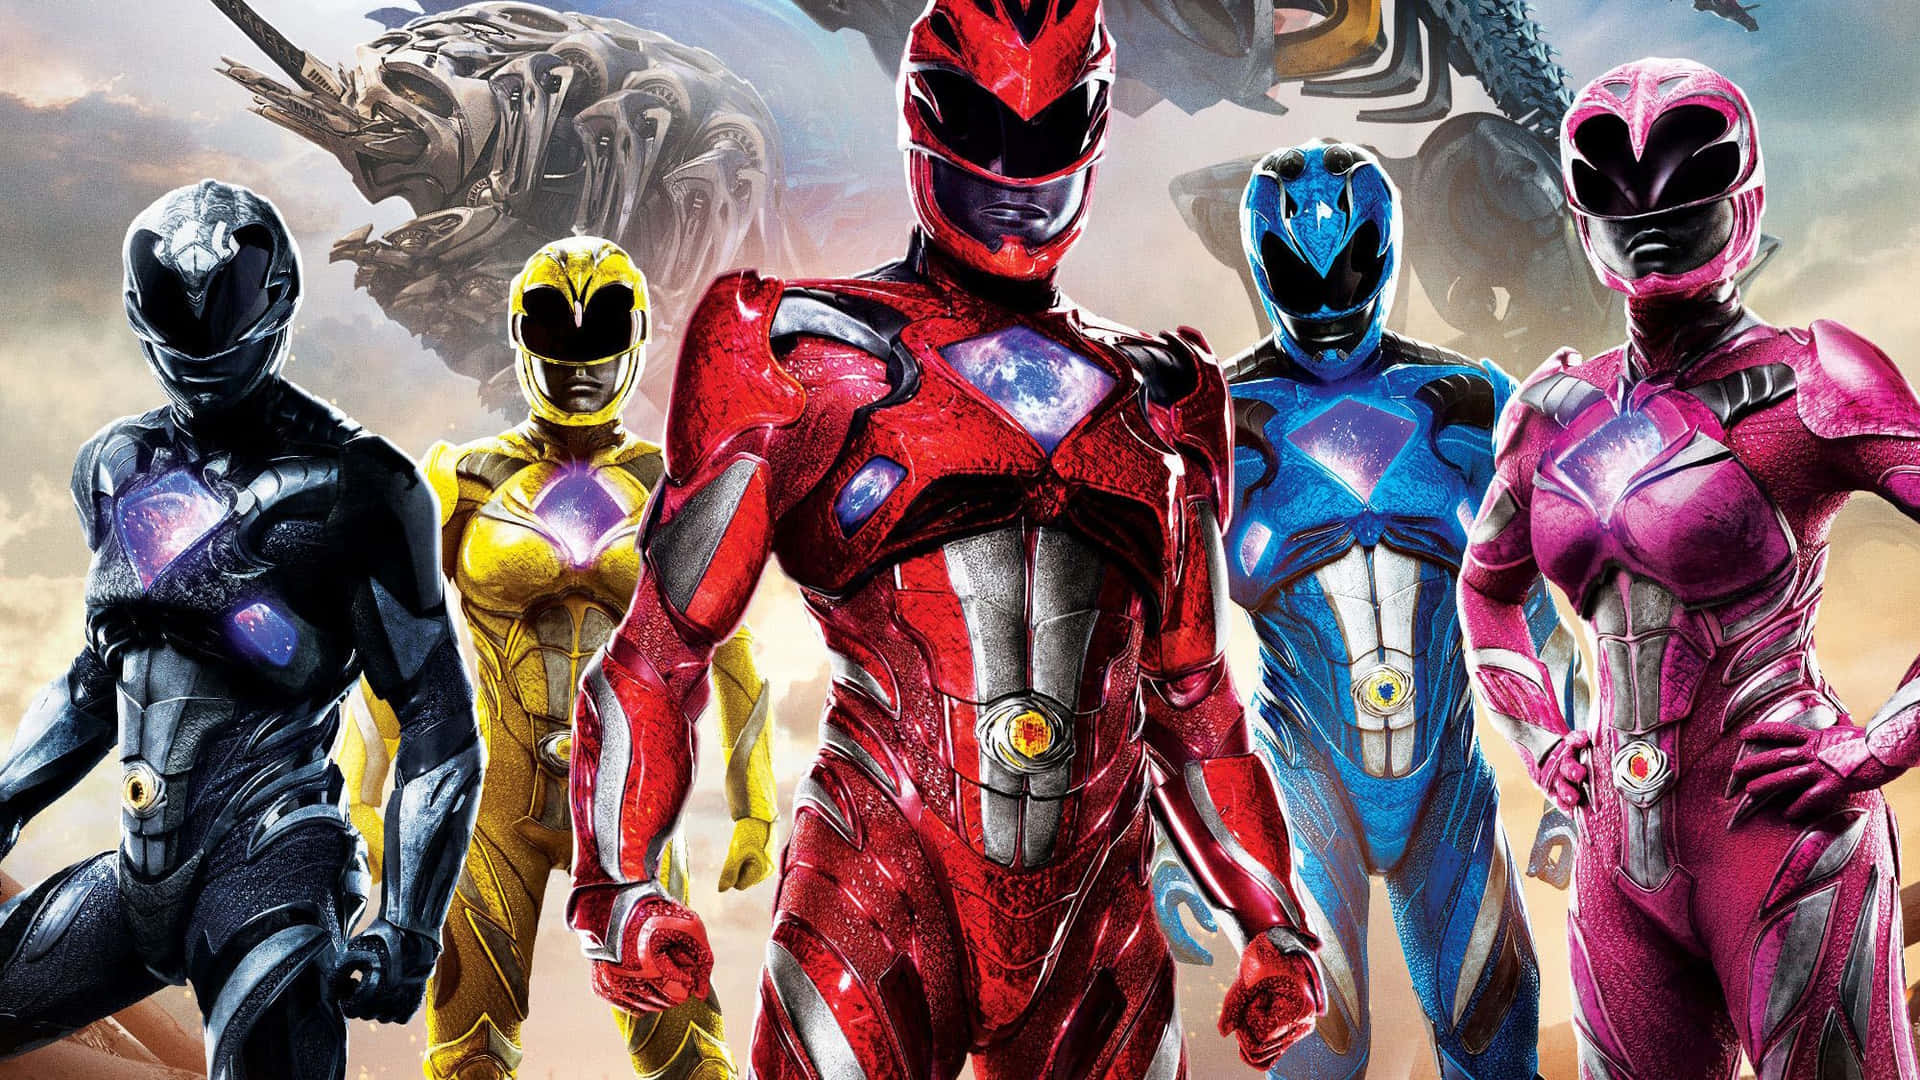 The Mighty Power Rangers Squad Poised for Action